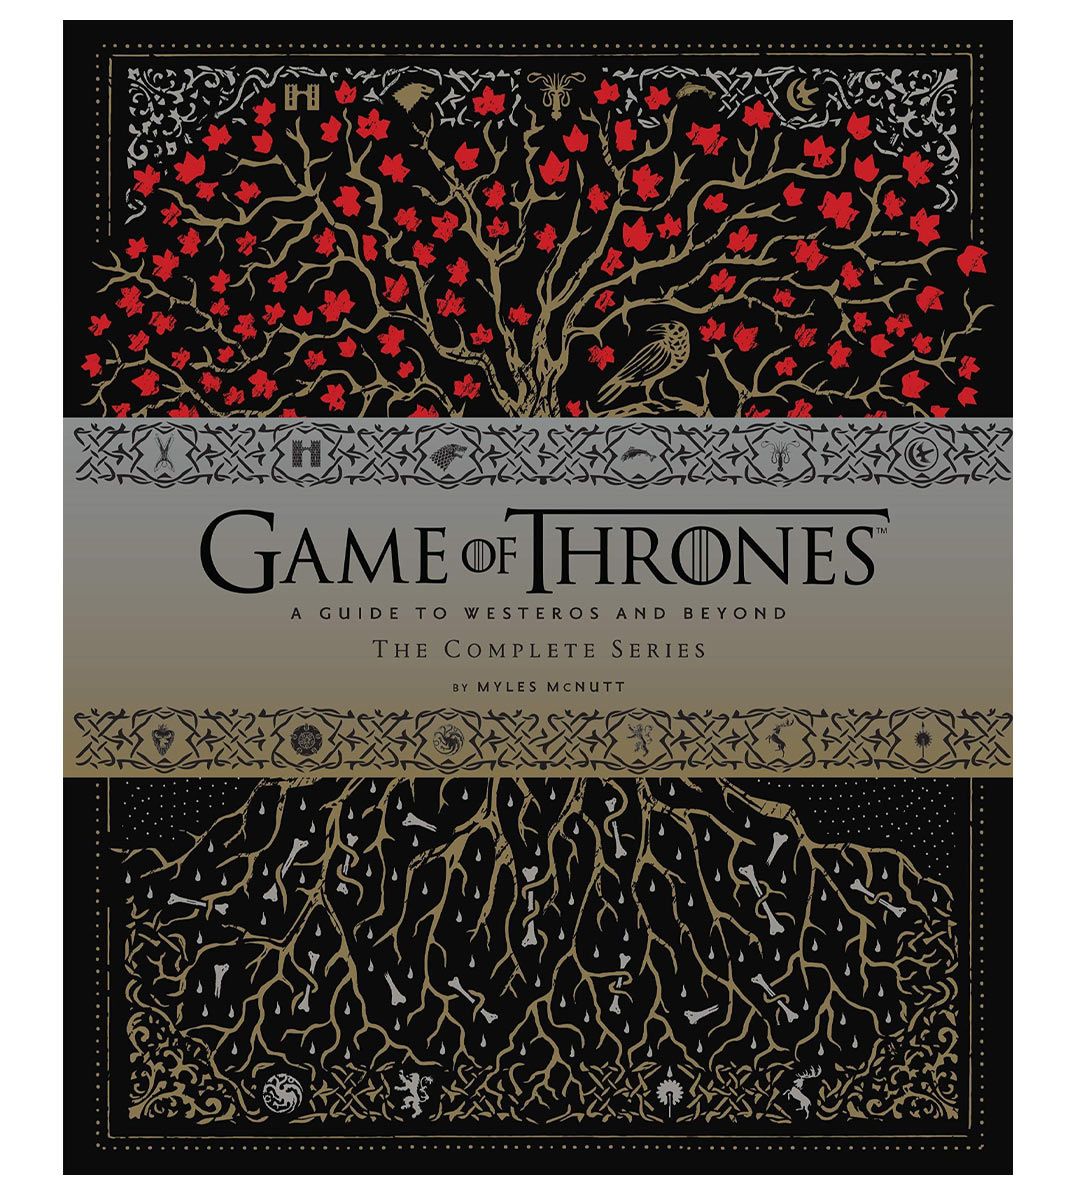 Game of Thrones - A Guide To Westeros and Beyond - The Complete Series